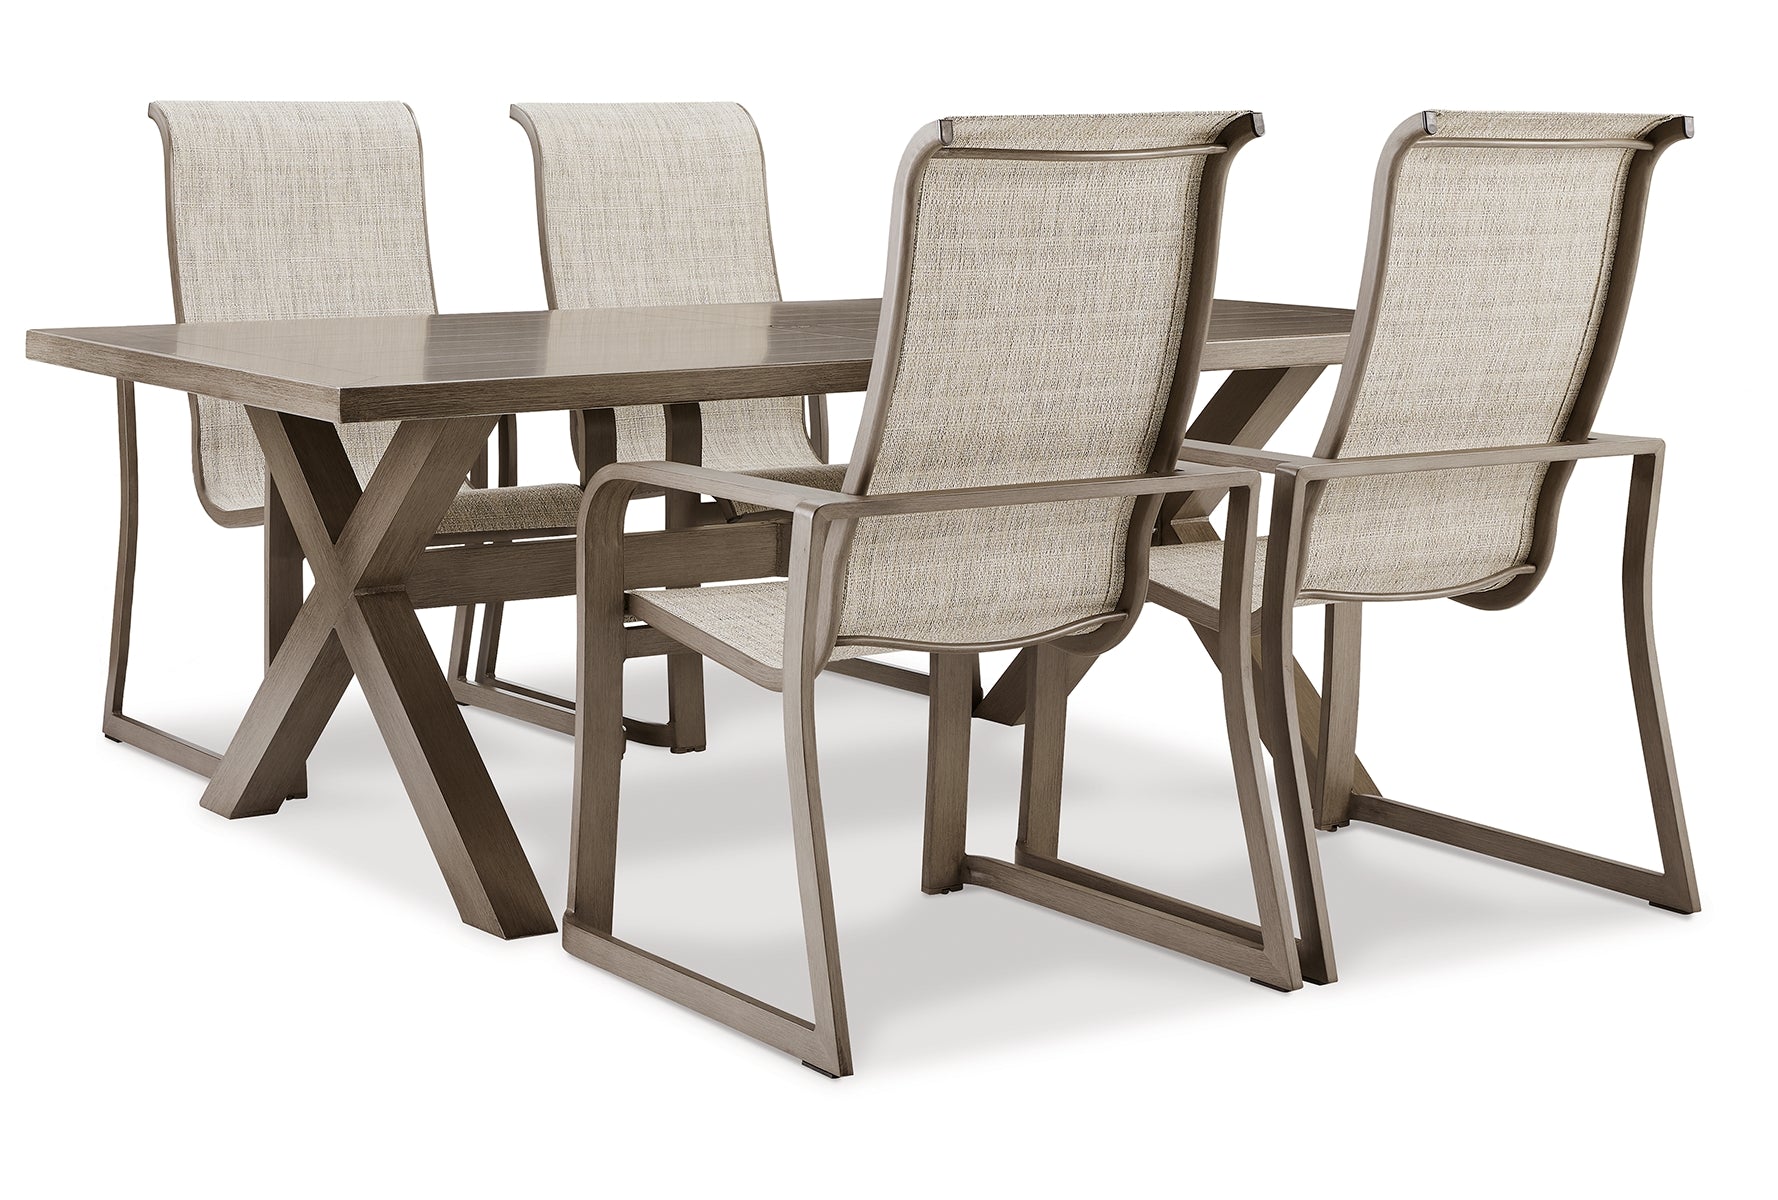 Beach Front Outdoor Dining Table and 4 Chairs